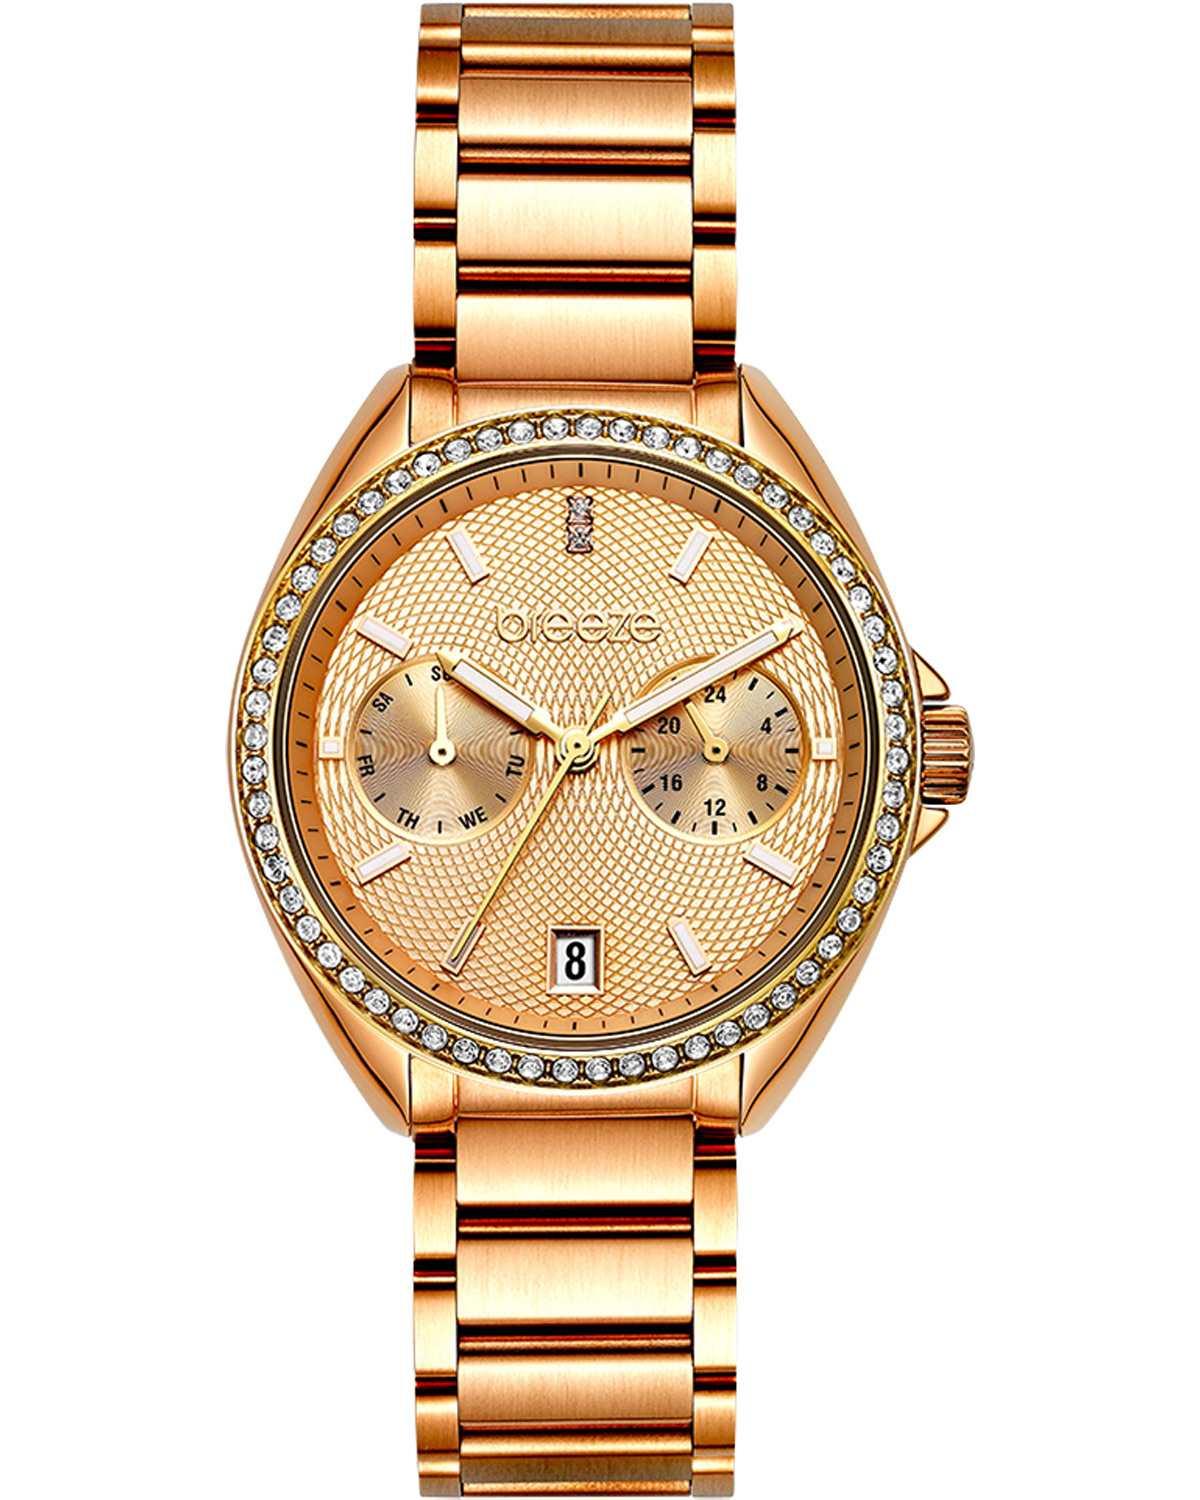 BREEZE Royalisse Crystals - 212161.4, Rose Gold case with Stainless Steel Bracelet